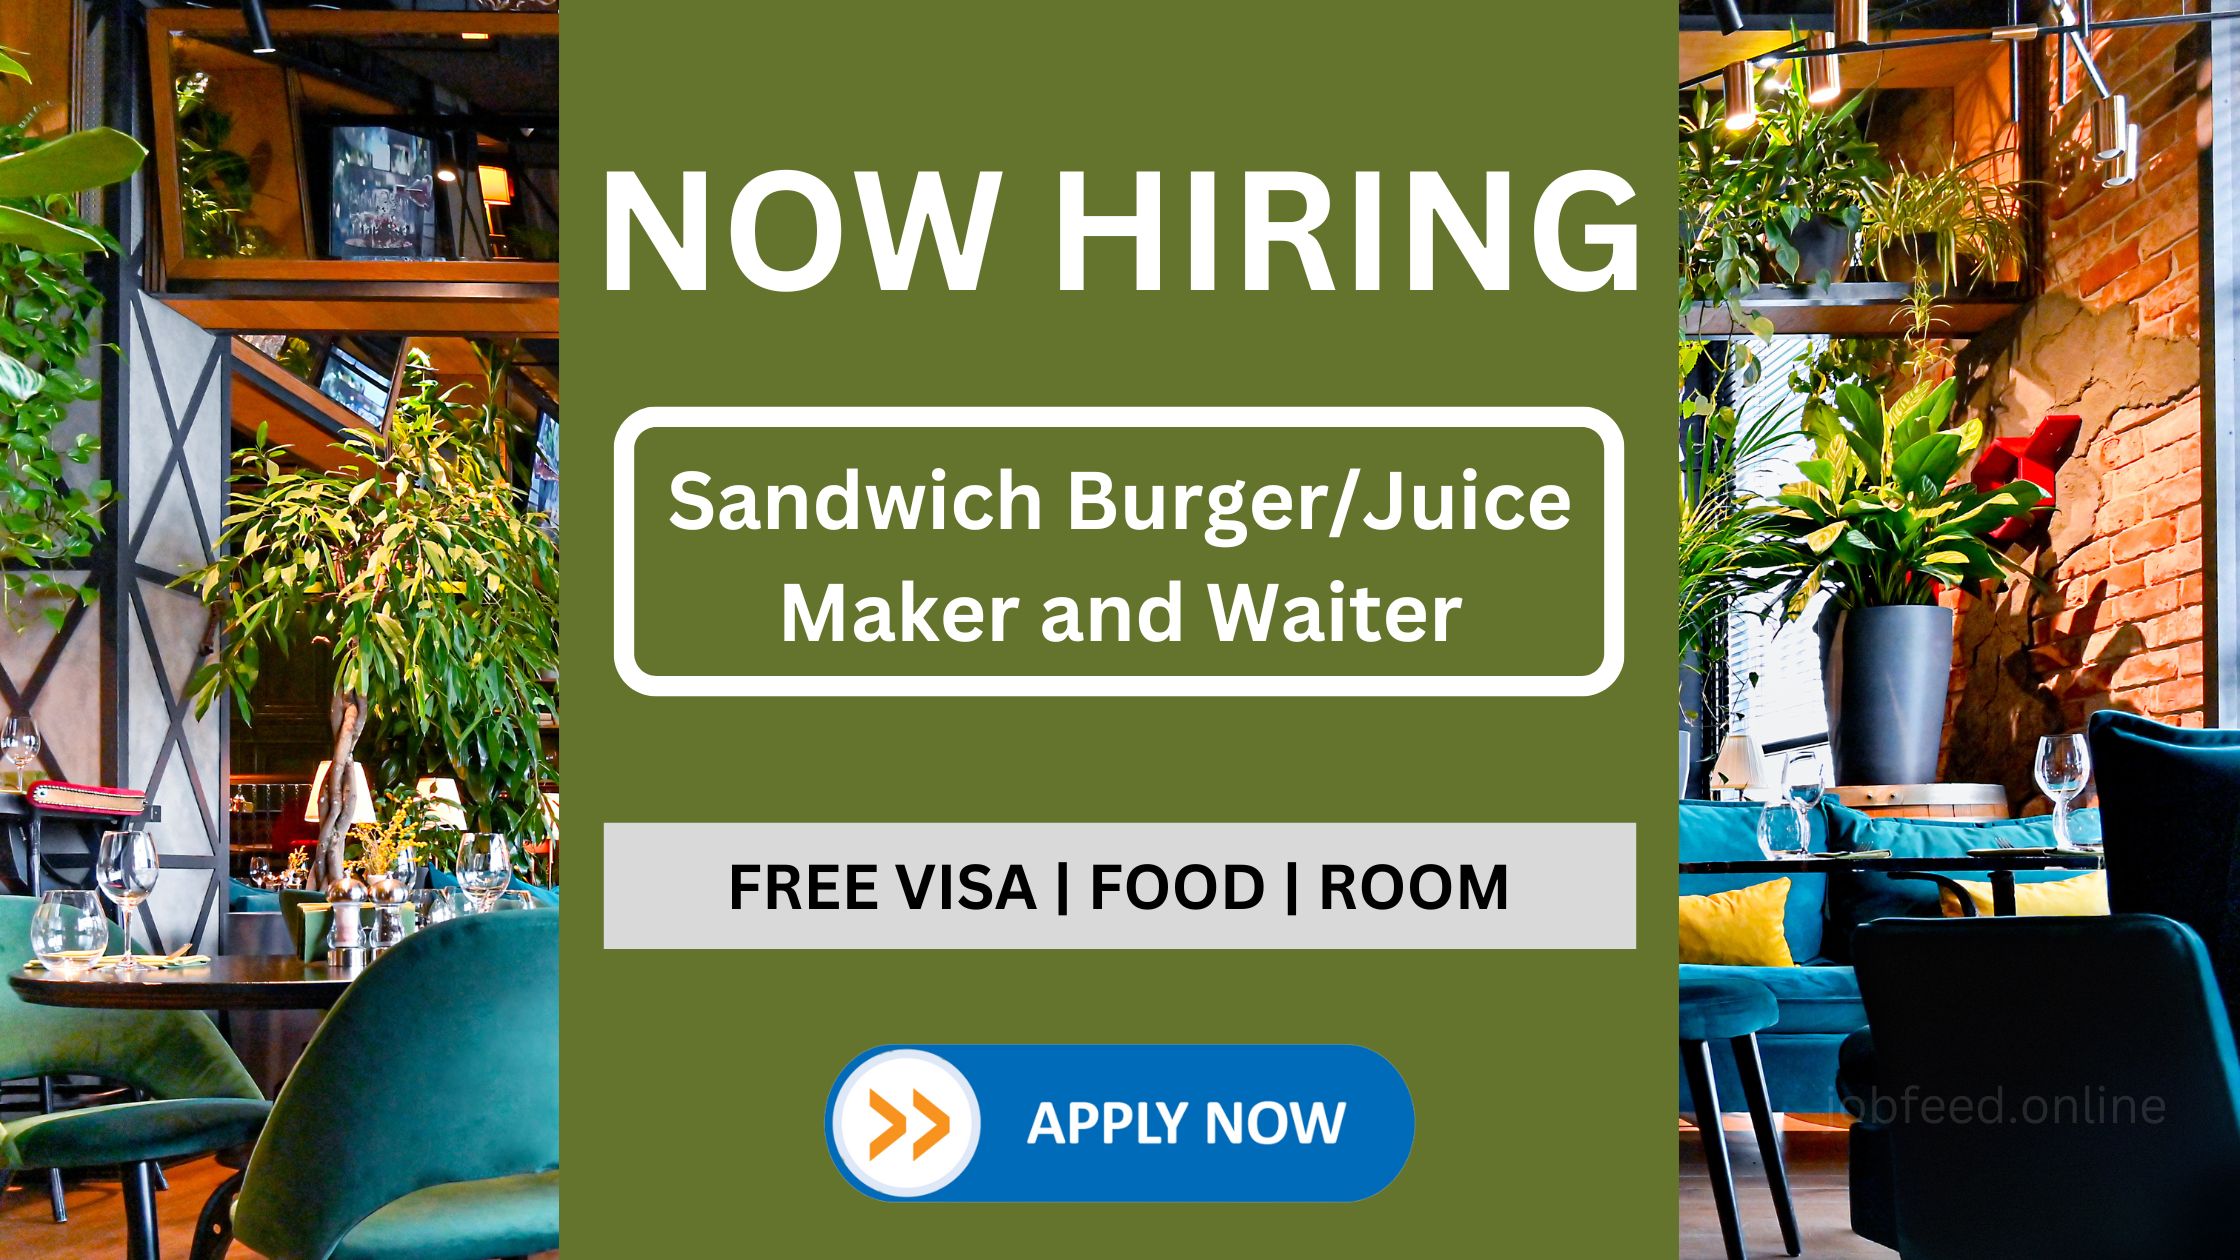 Sandwich Burger/Juice Maker and Waiter with Salary of 1500 aed